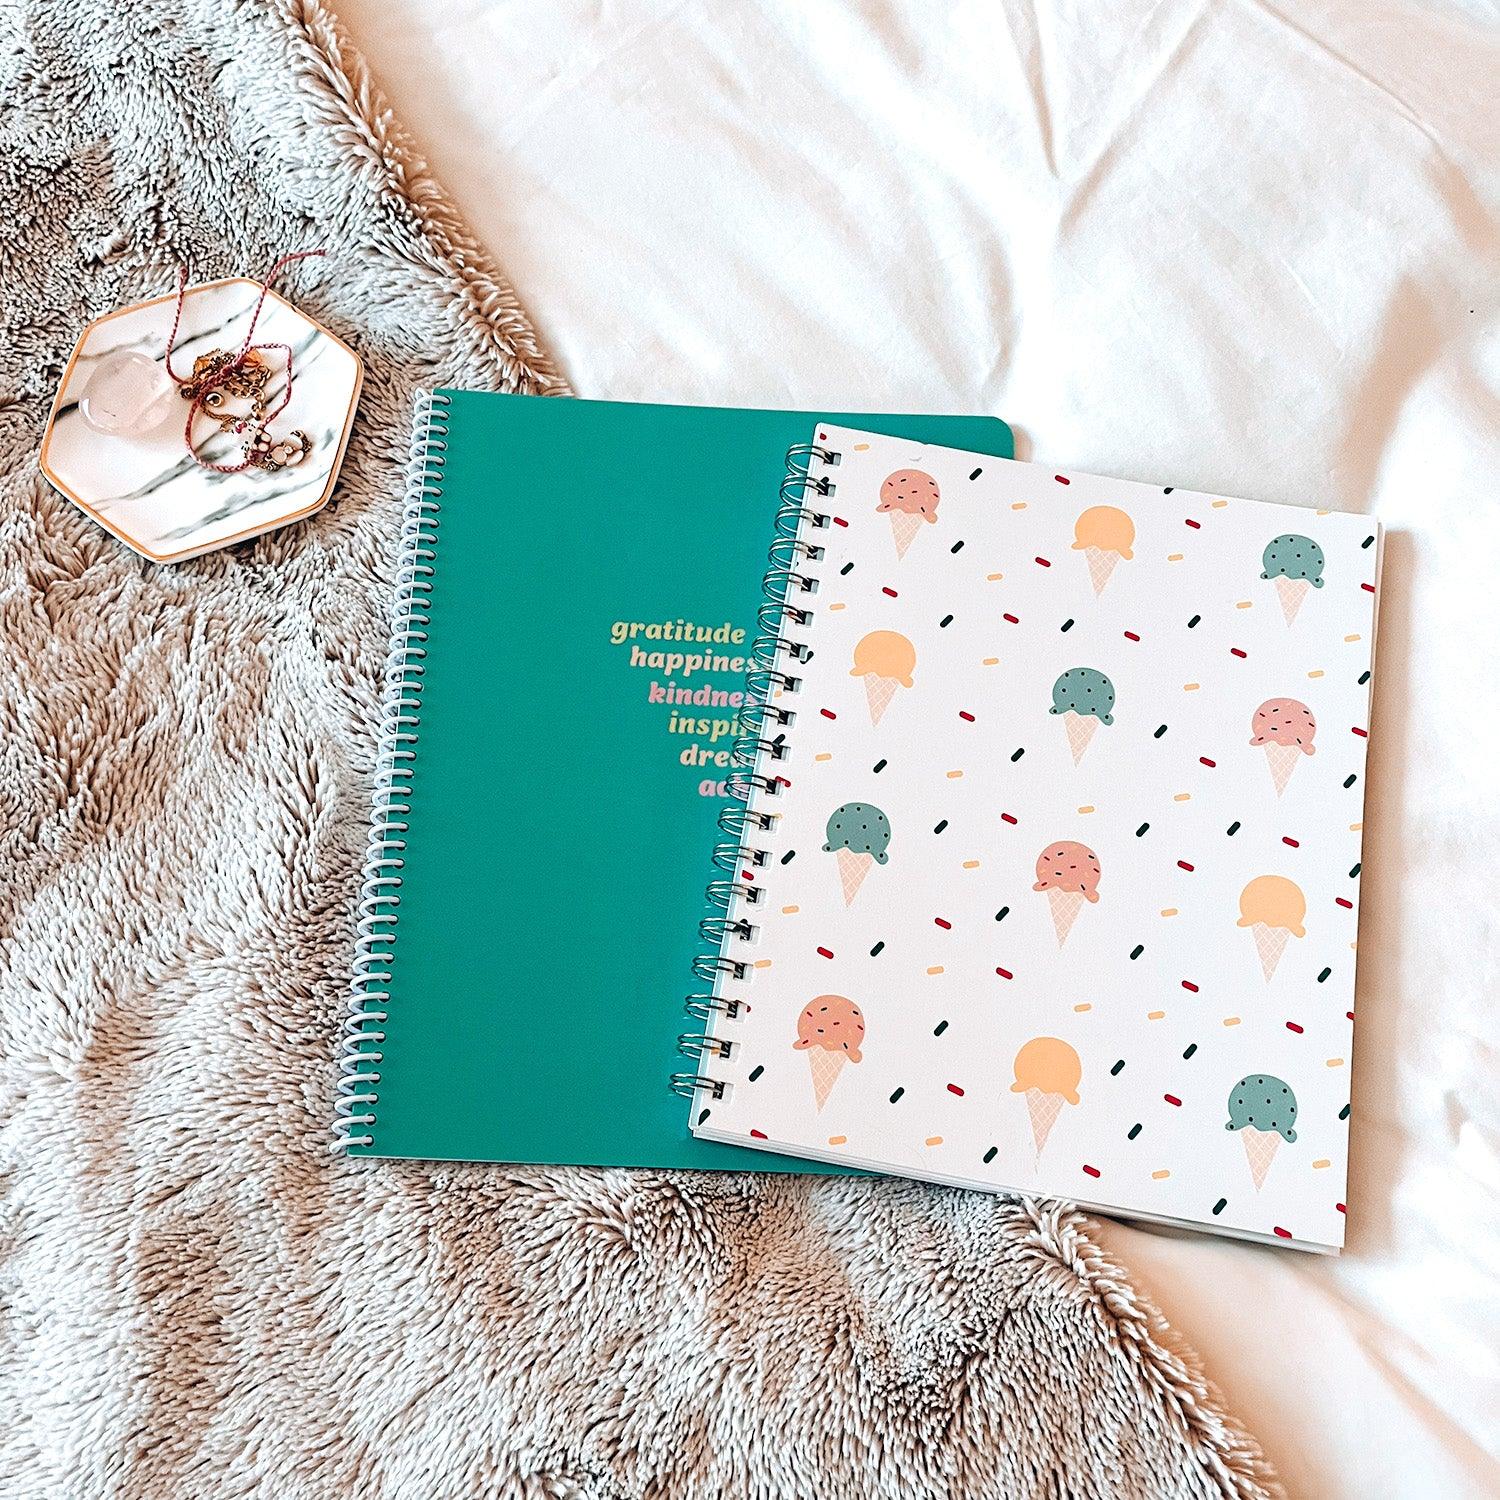 Ice cream with sprinkles journal flat lay on bed